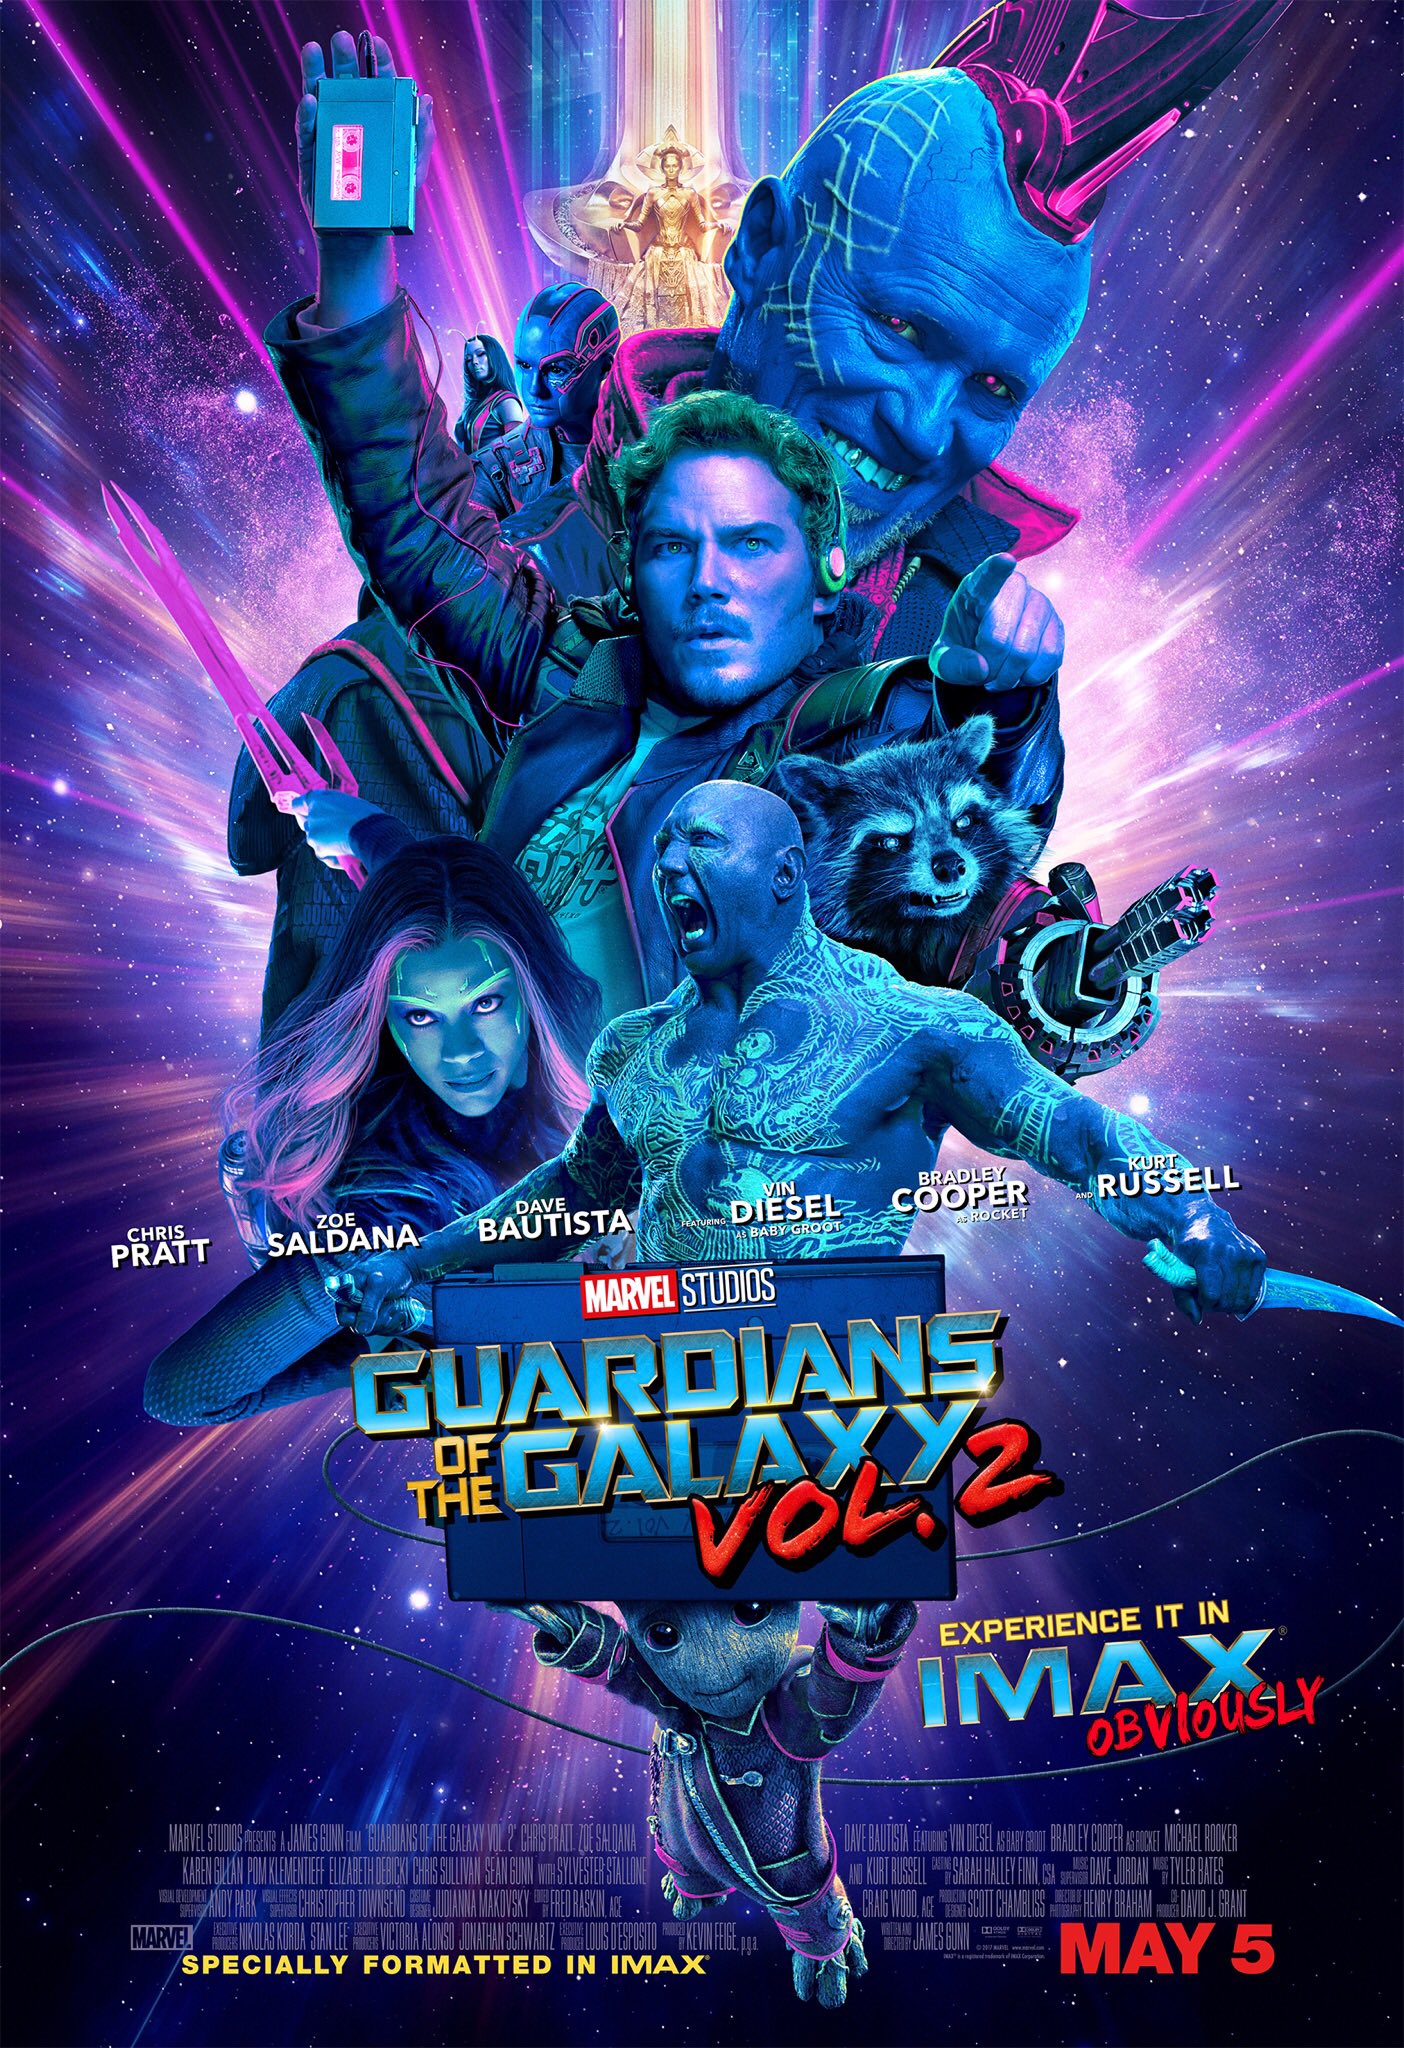 Guardians of the Galaxy Vol.2 Imax poster